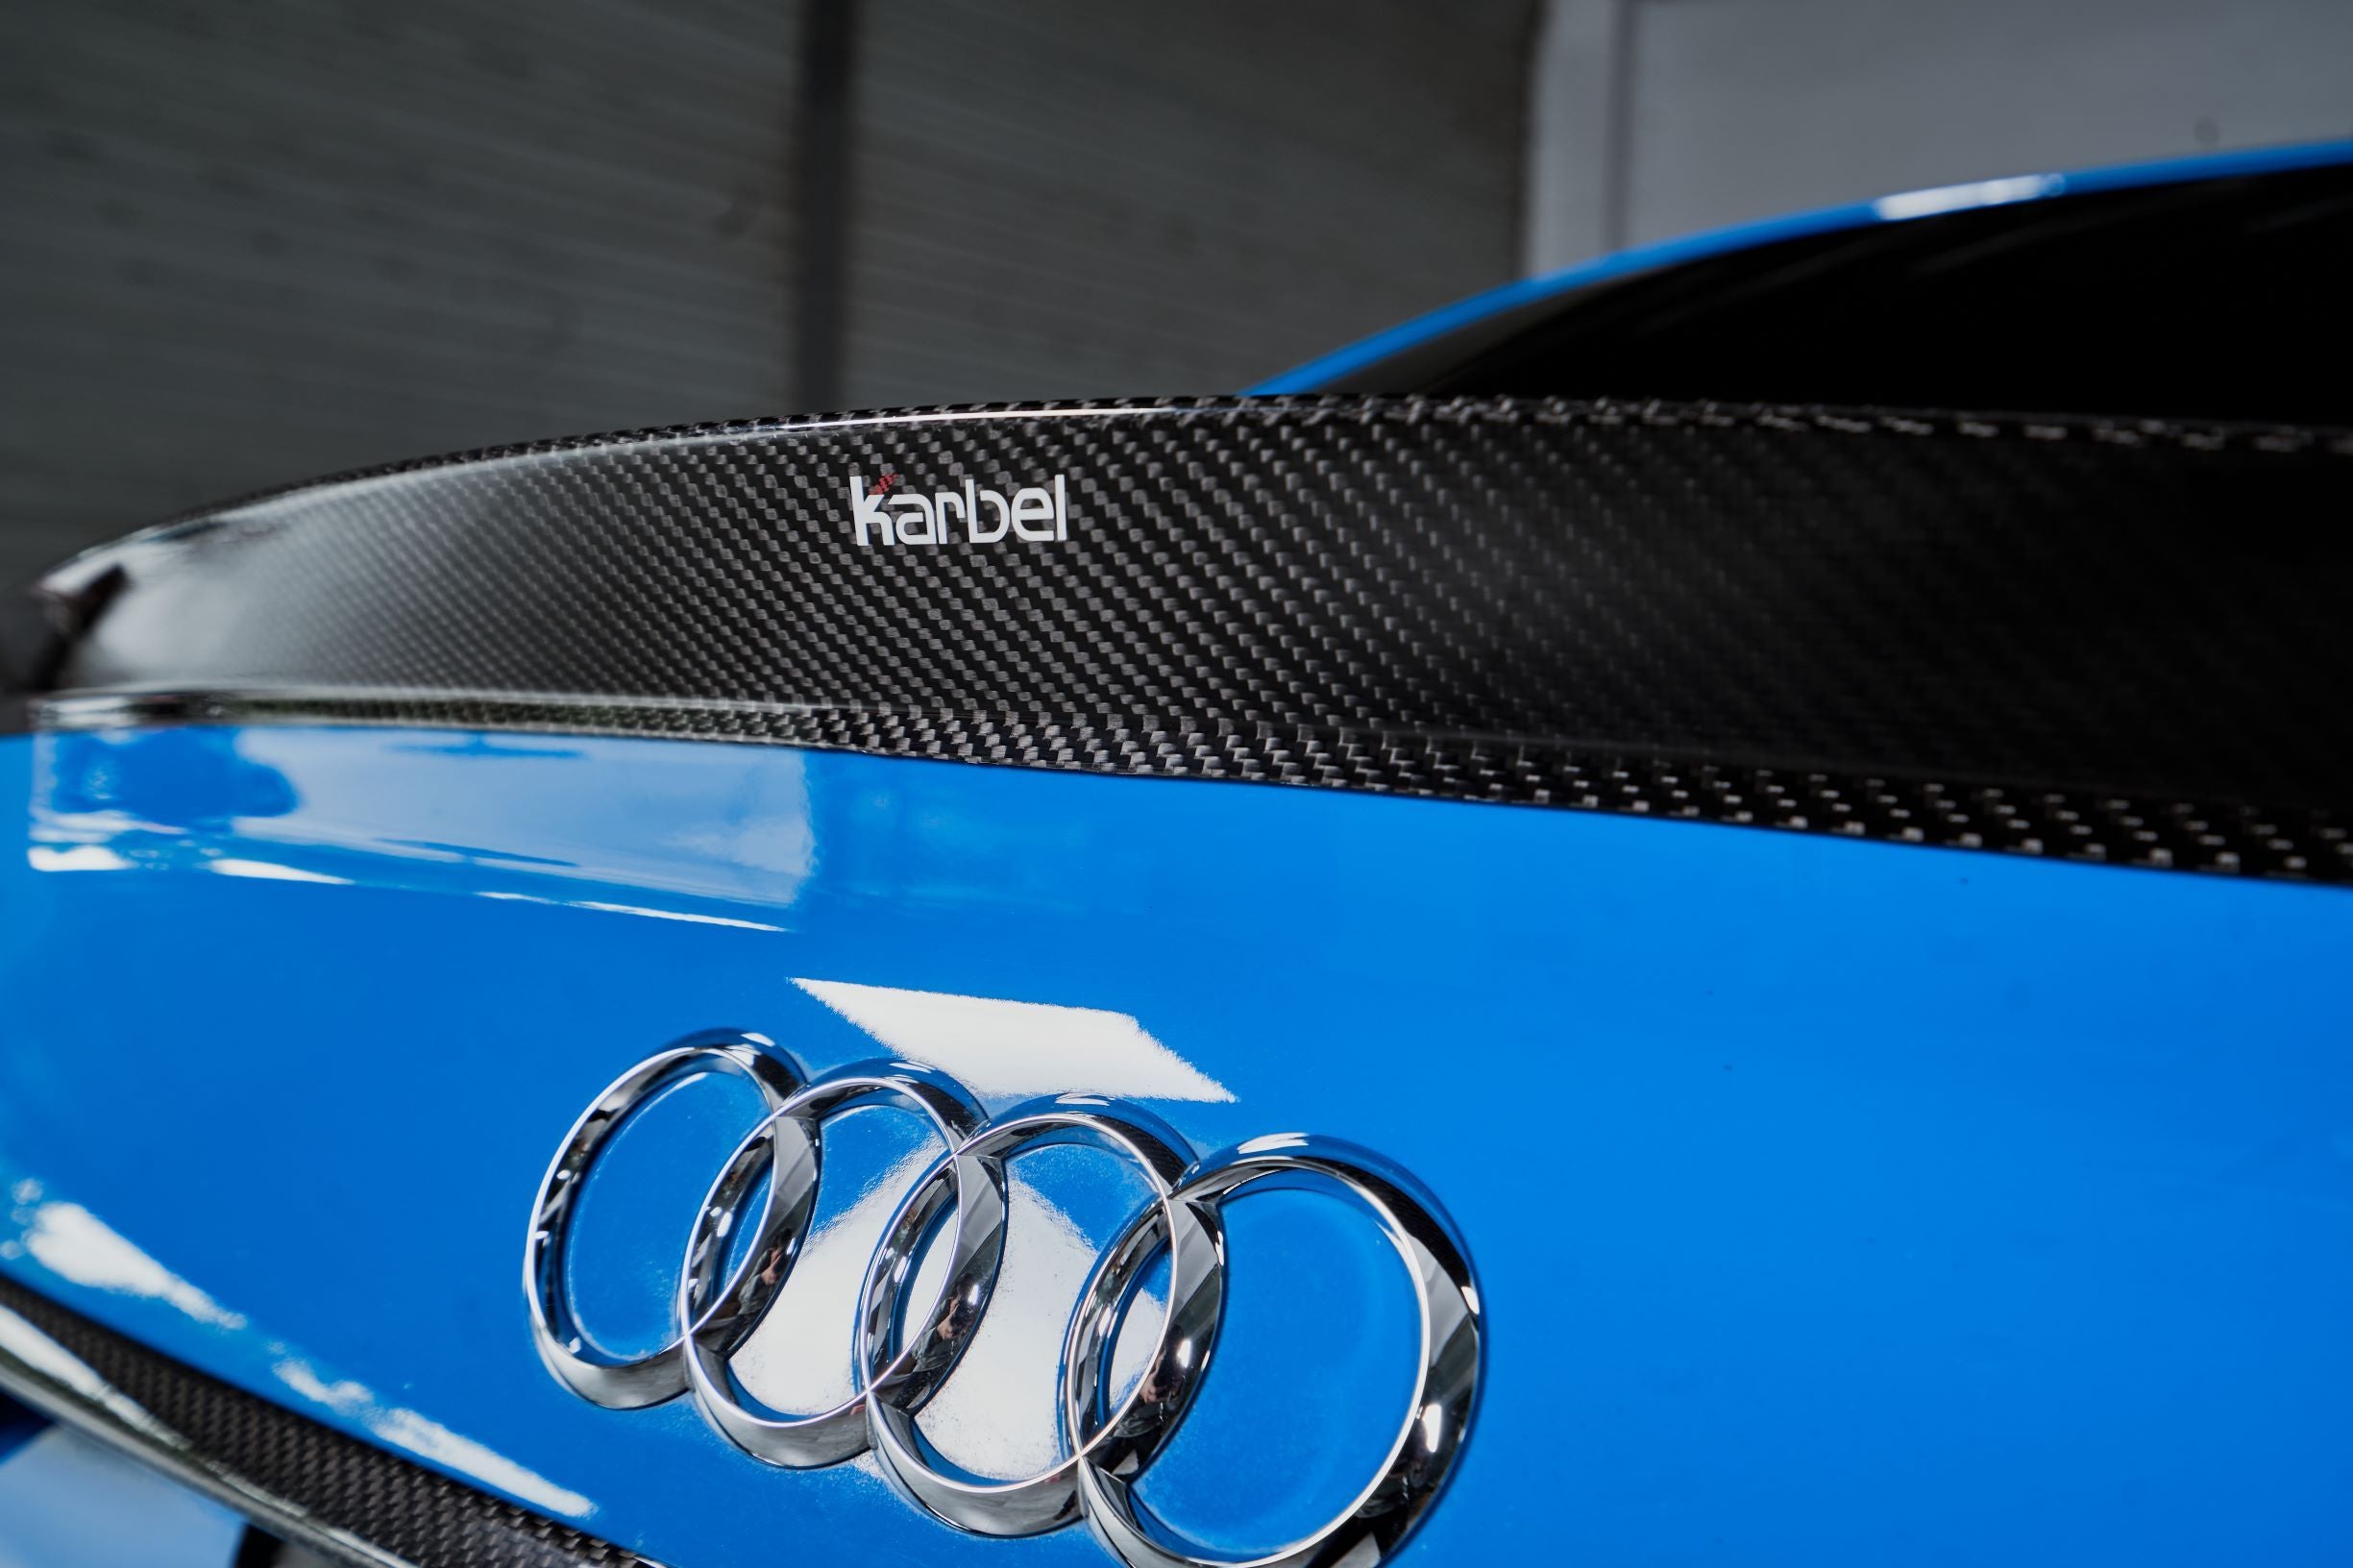 Check our price and buy Karbel Carbon Fiber Body kit set for Audi S4 B9 Restyling